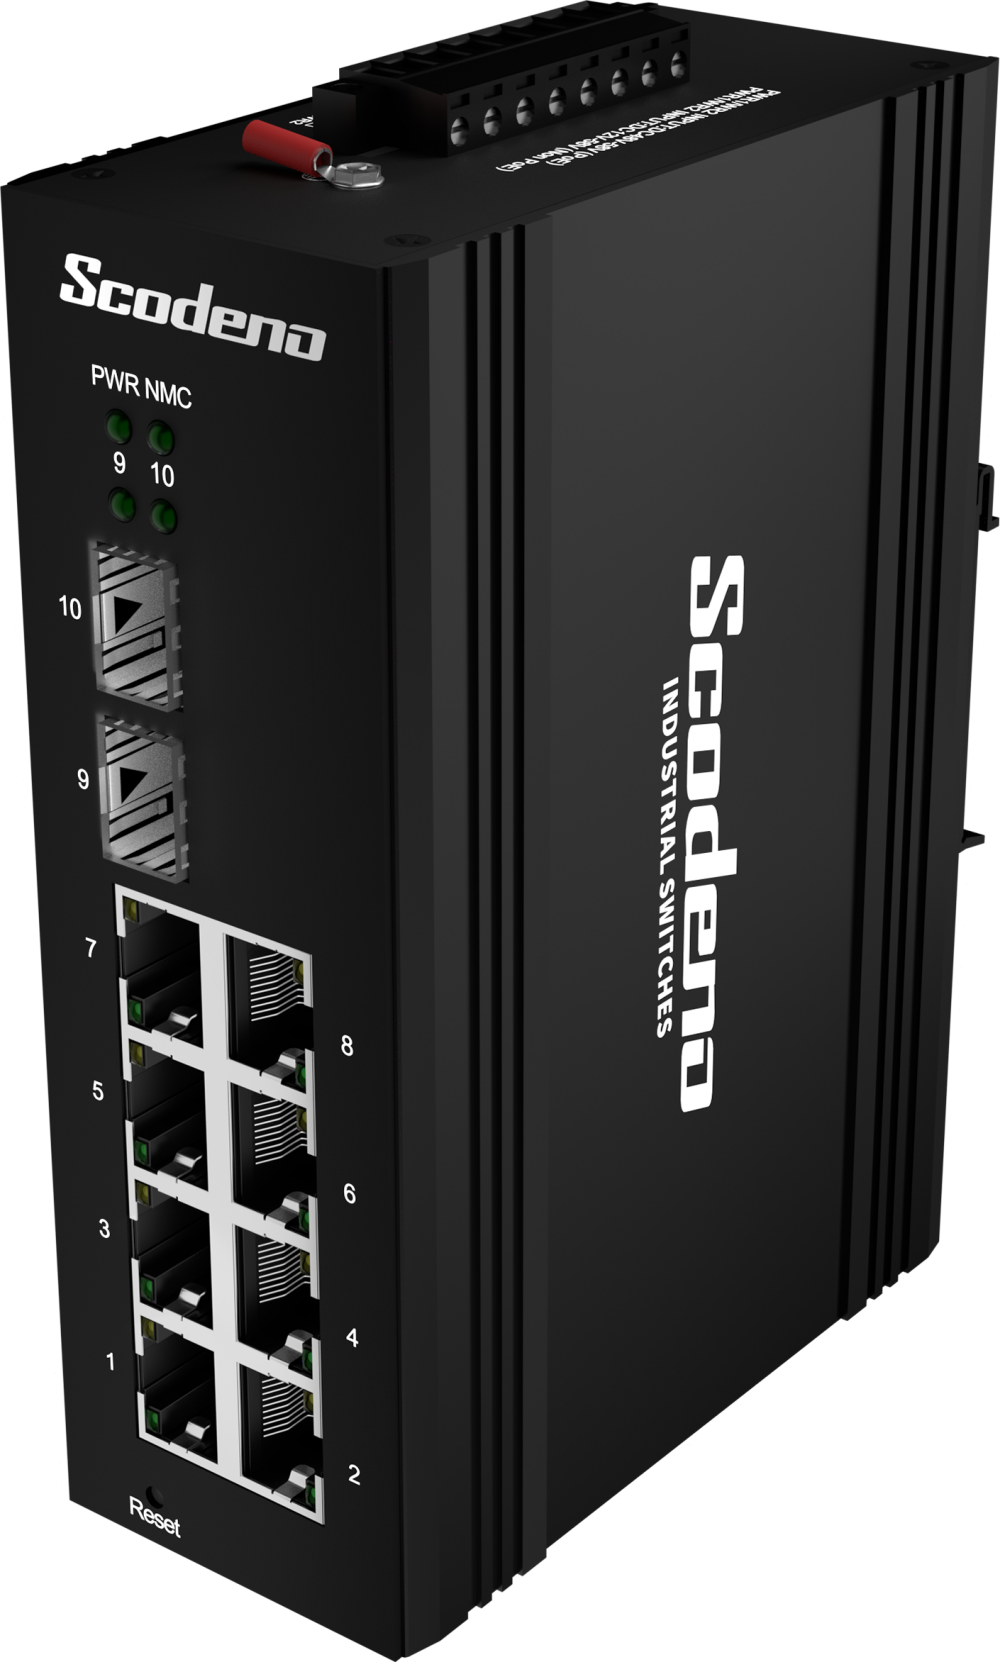 2 Basis x 8 Basist-Industrie-Ethernet-Switch